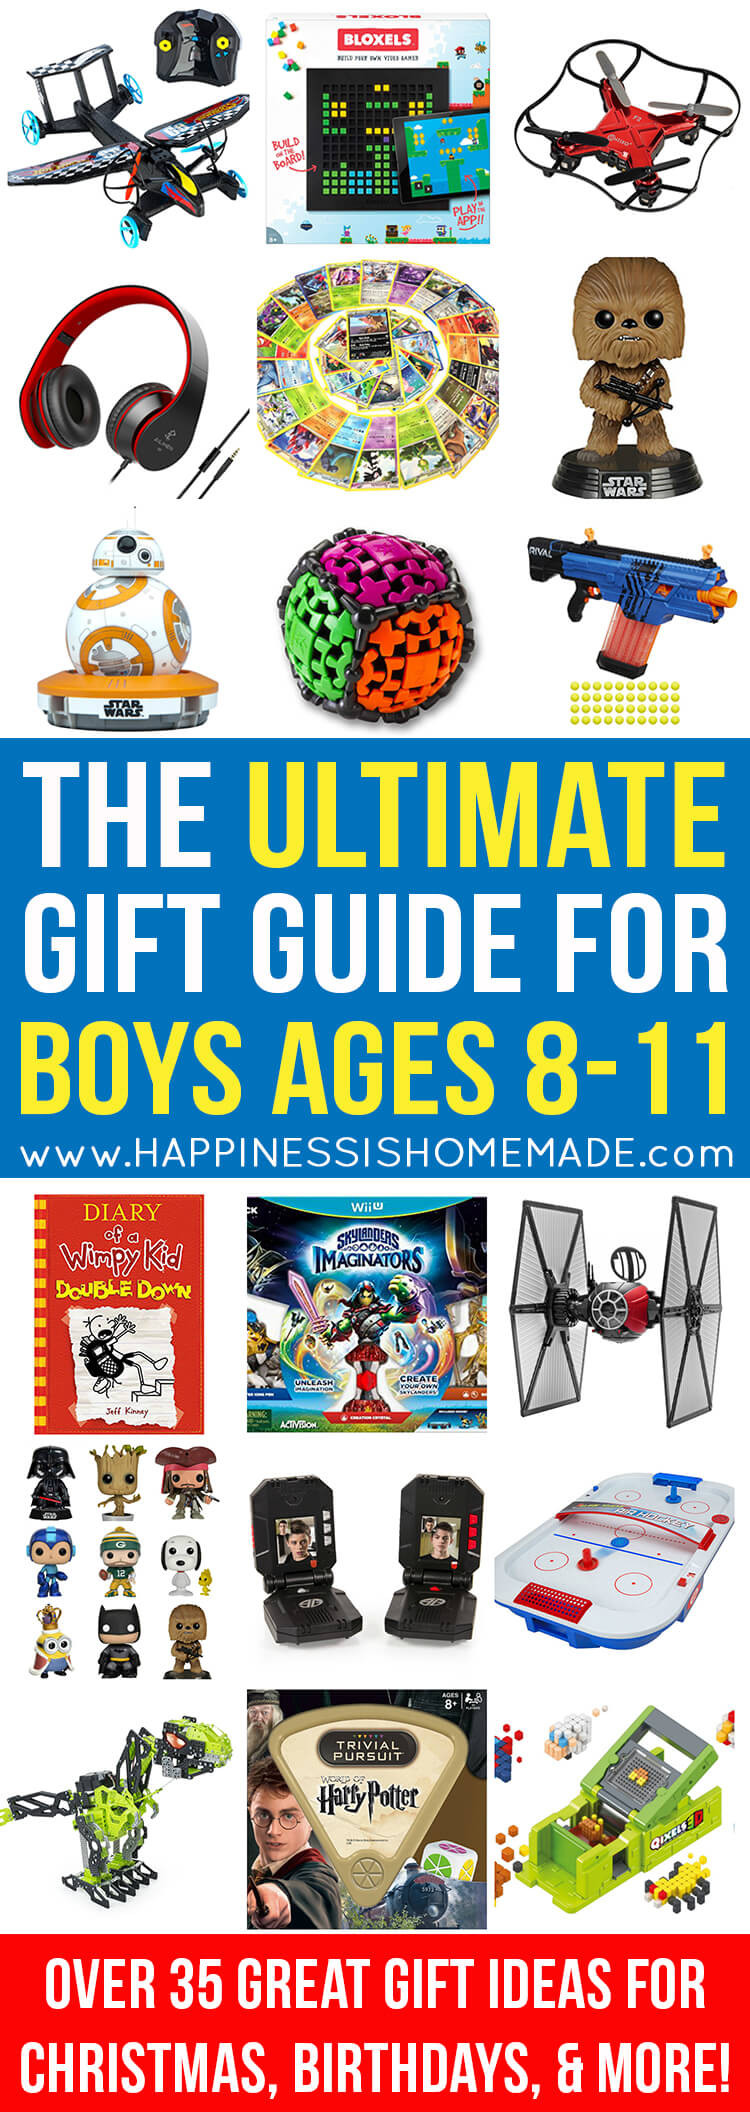 Great Gift Ideas For Boys
 The Best Gift Ideas for Boys Ages 8 11 Happiness is Homemade